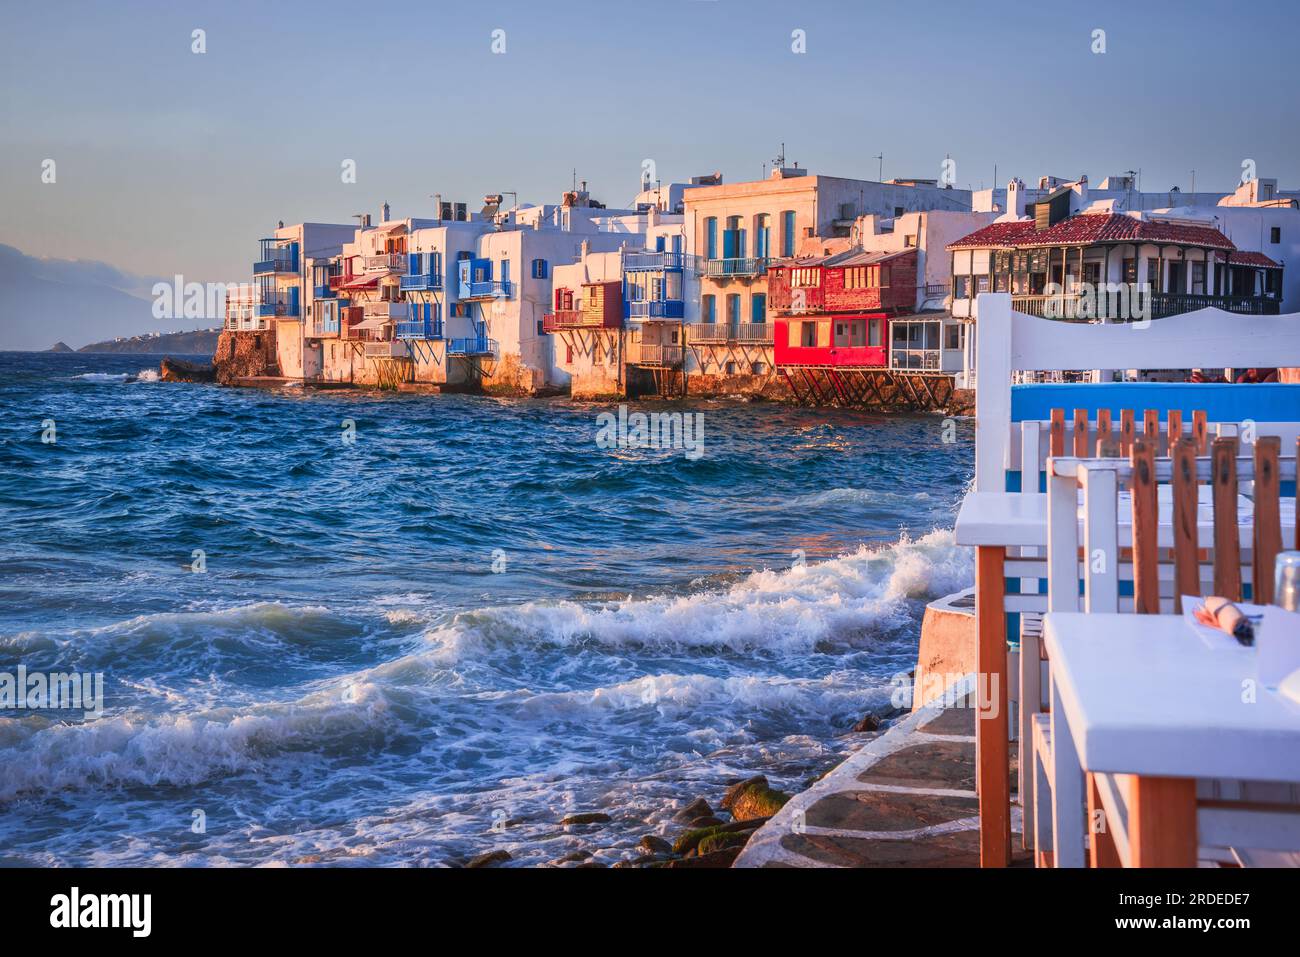 Little Venice in Mykonos is a charming neighborhood where colorful houses stand at the water's edge, offering breathtaking views of the Aegean Sea and Stock Photo